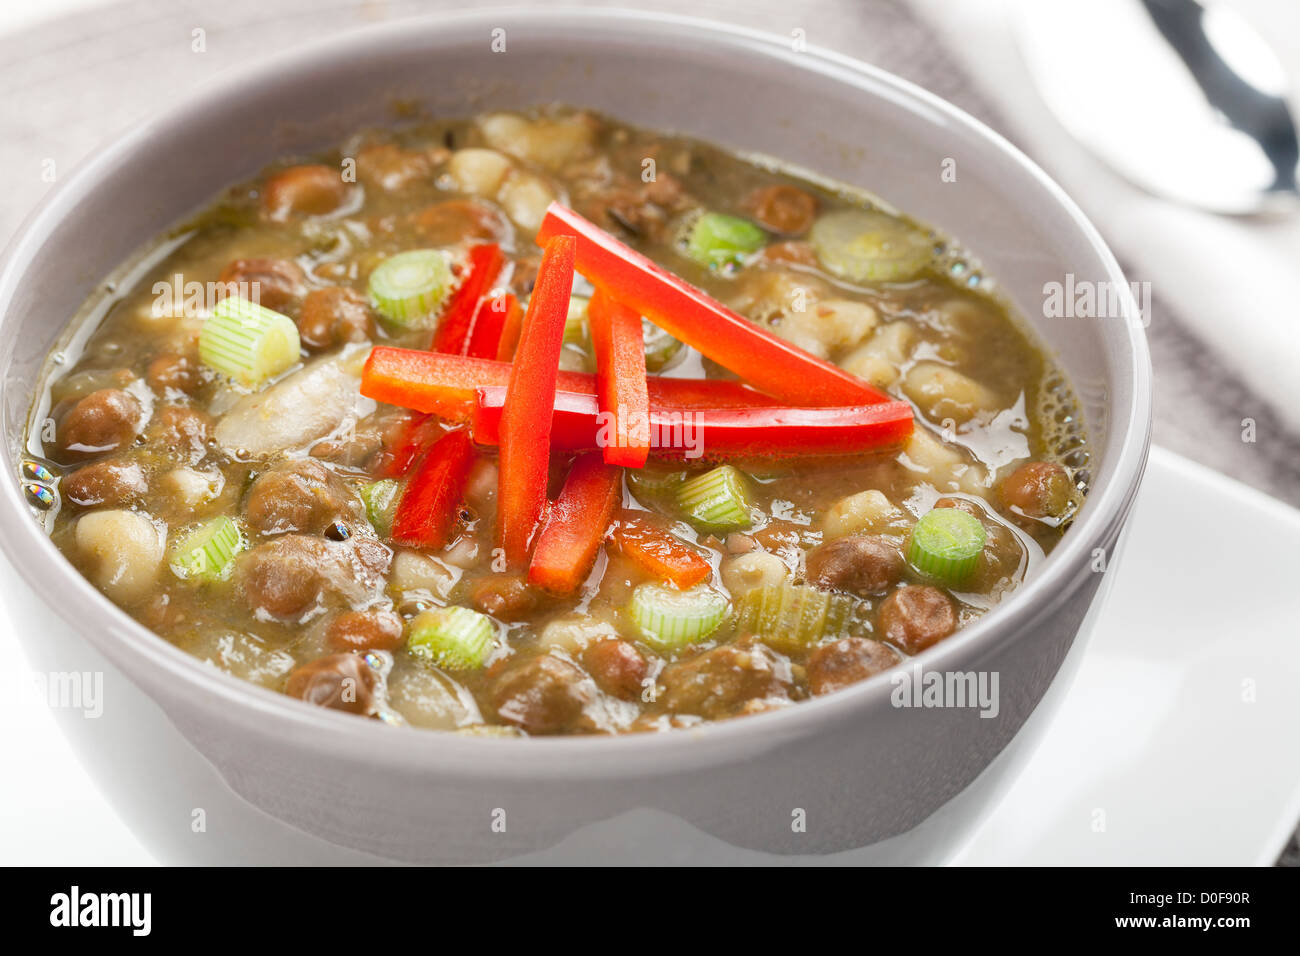 Bowl of fresh soup with kapucijners, green onions, and red bell pepper garnish Stock Photo